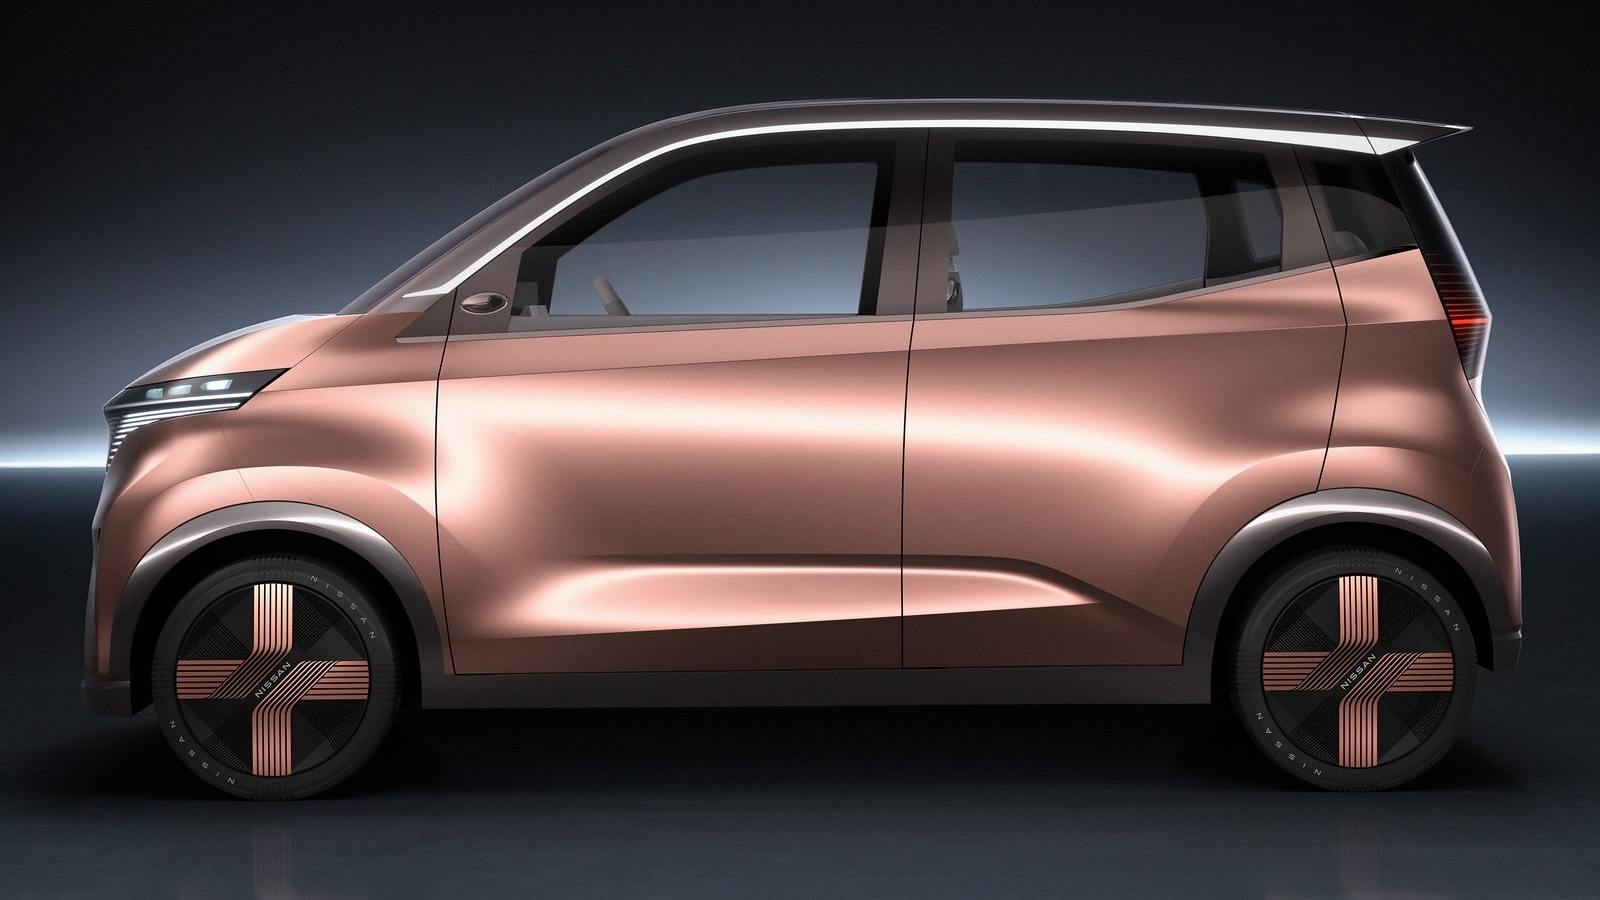 Nissan's electric microcar will also feature advanced driver assistance systems. Image: Nissan